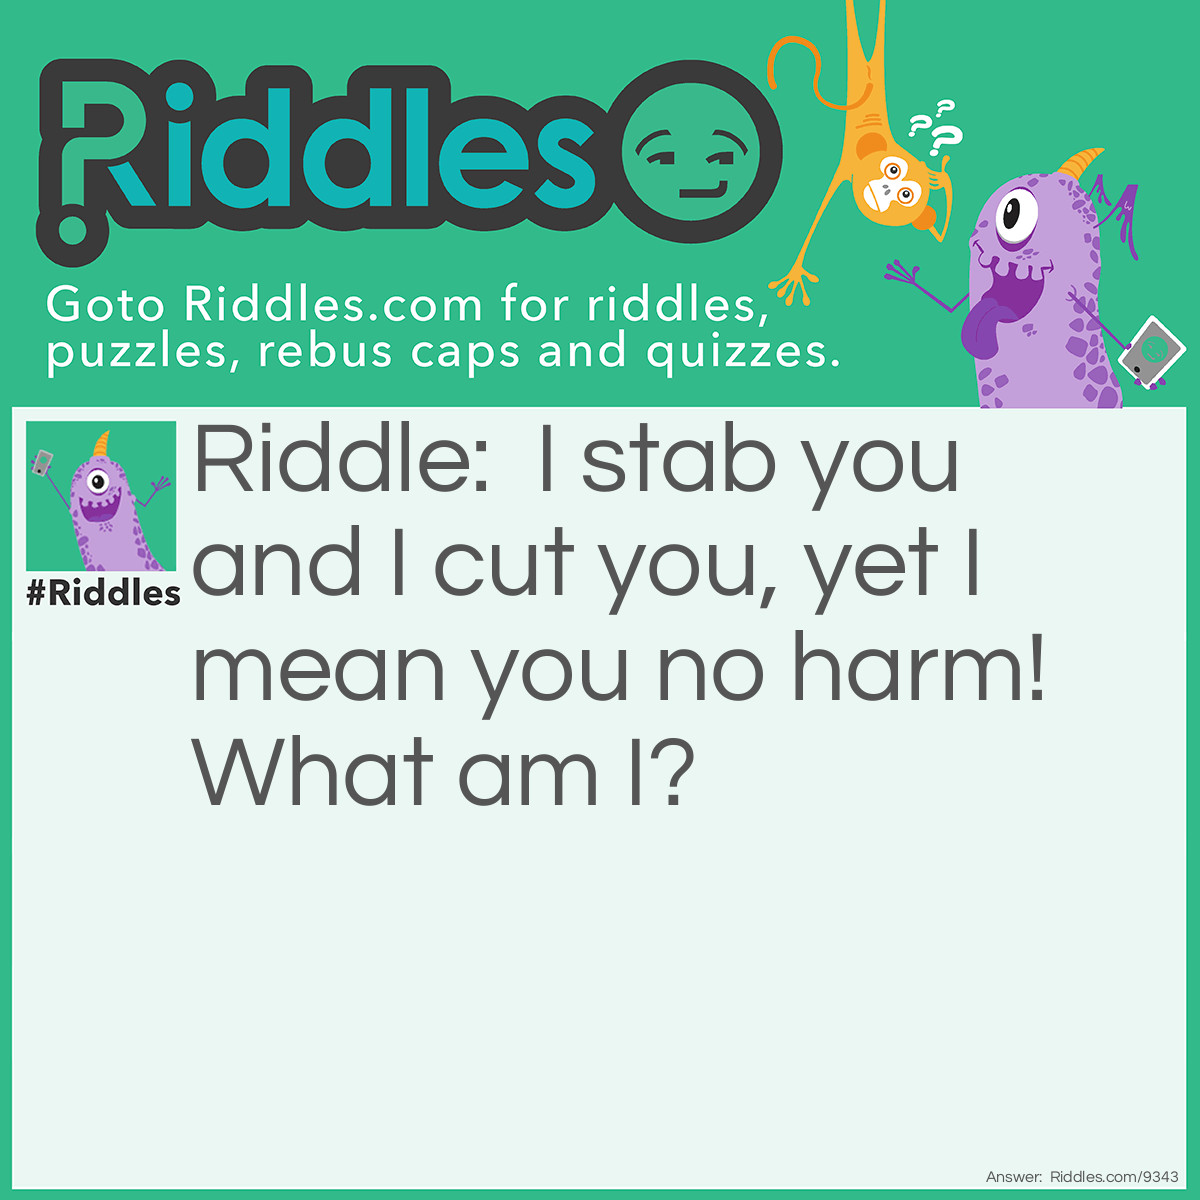 Riddle: I stab you and I cut you, yet I mean you no harm! What am I? Answer: A surgeon.